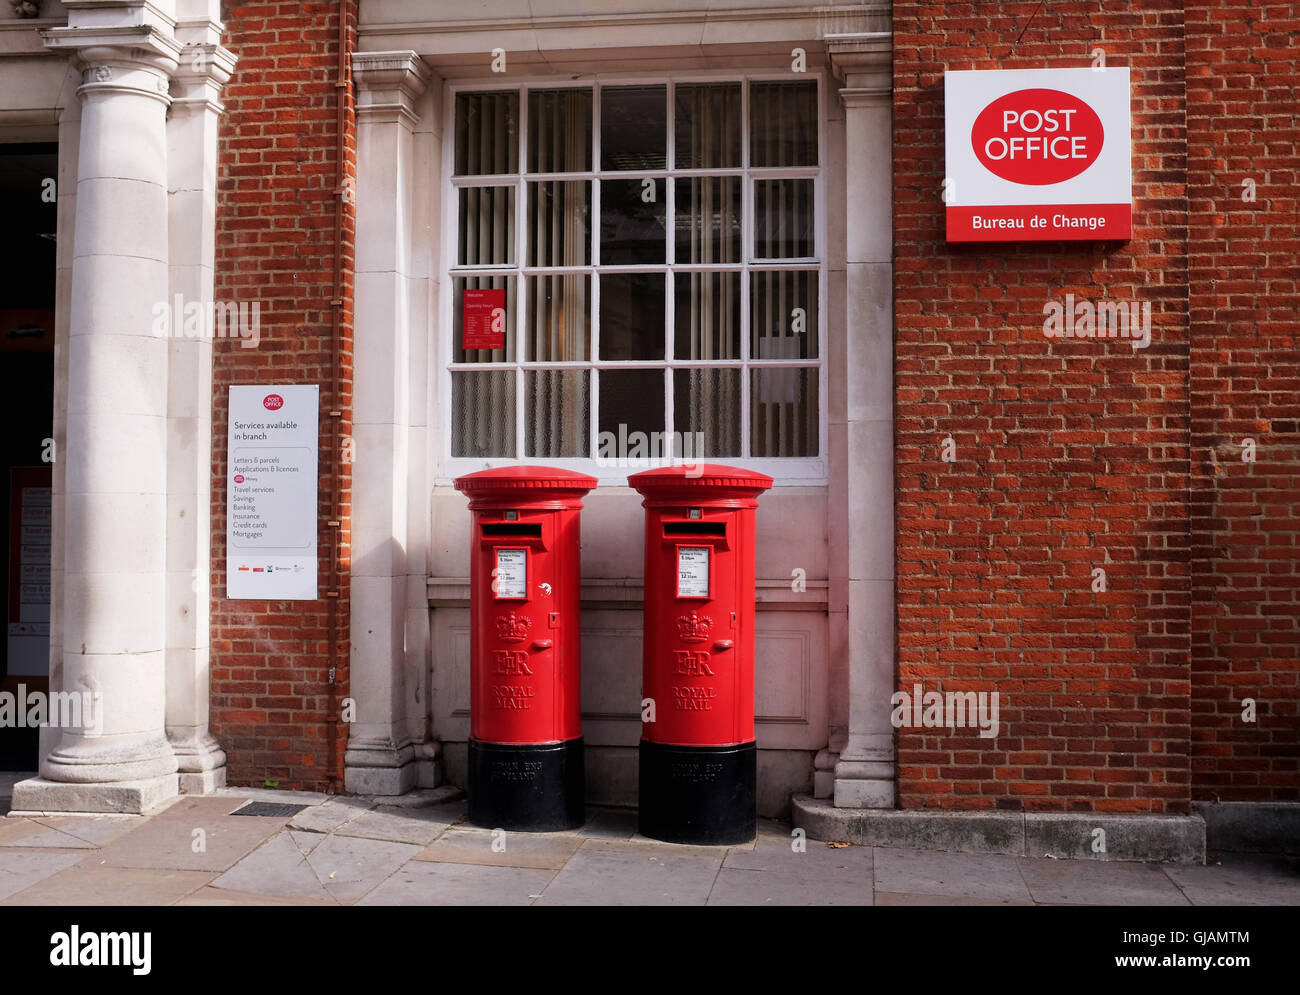 Chichester Post Office with red letter boxes and burea de change Stock Photo